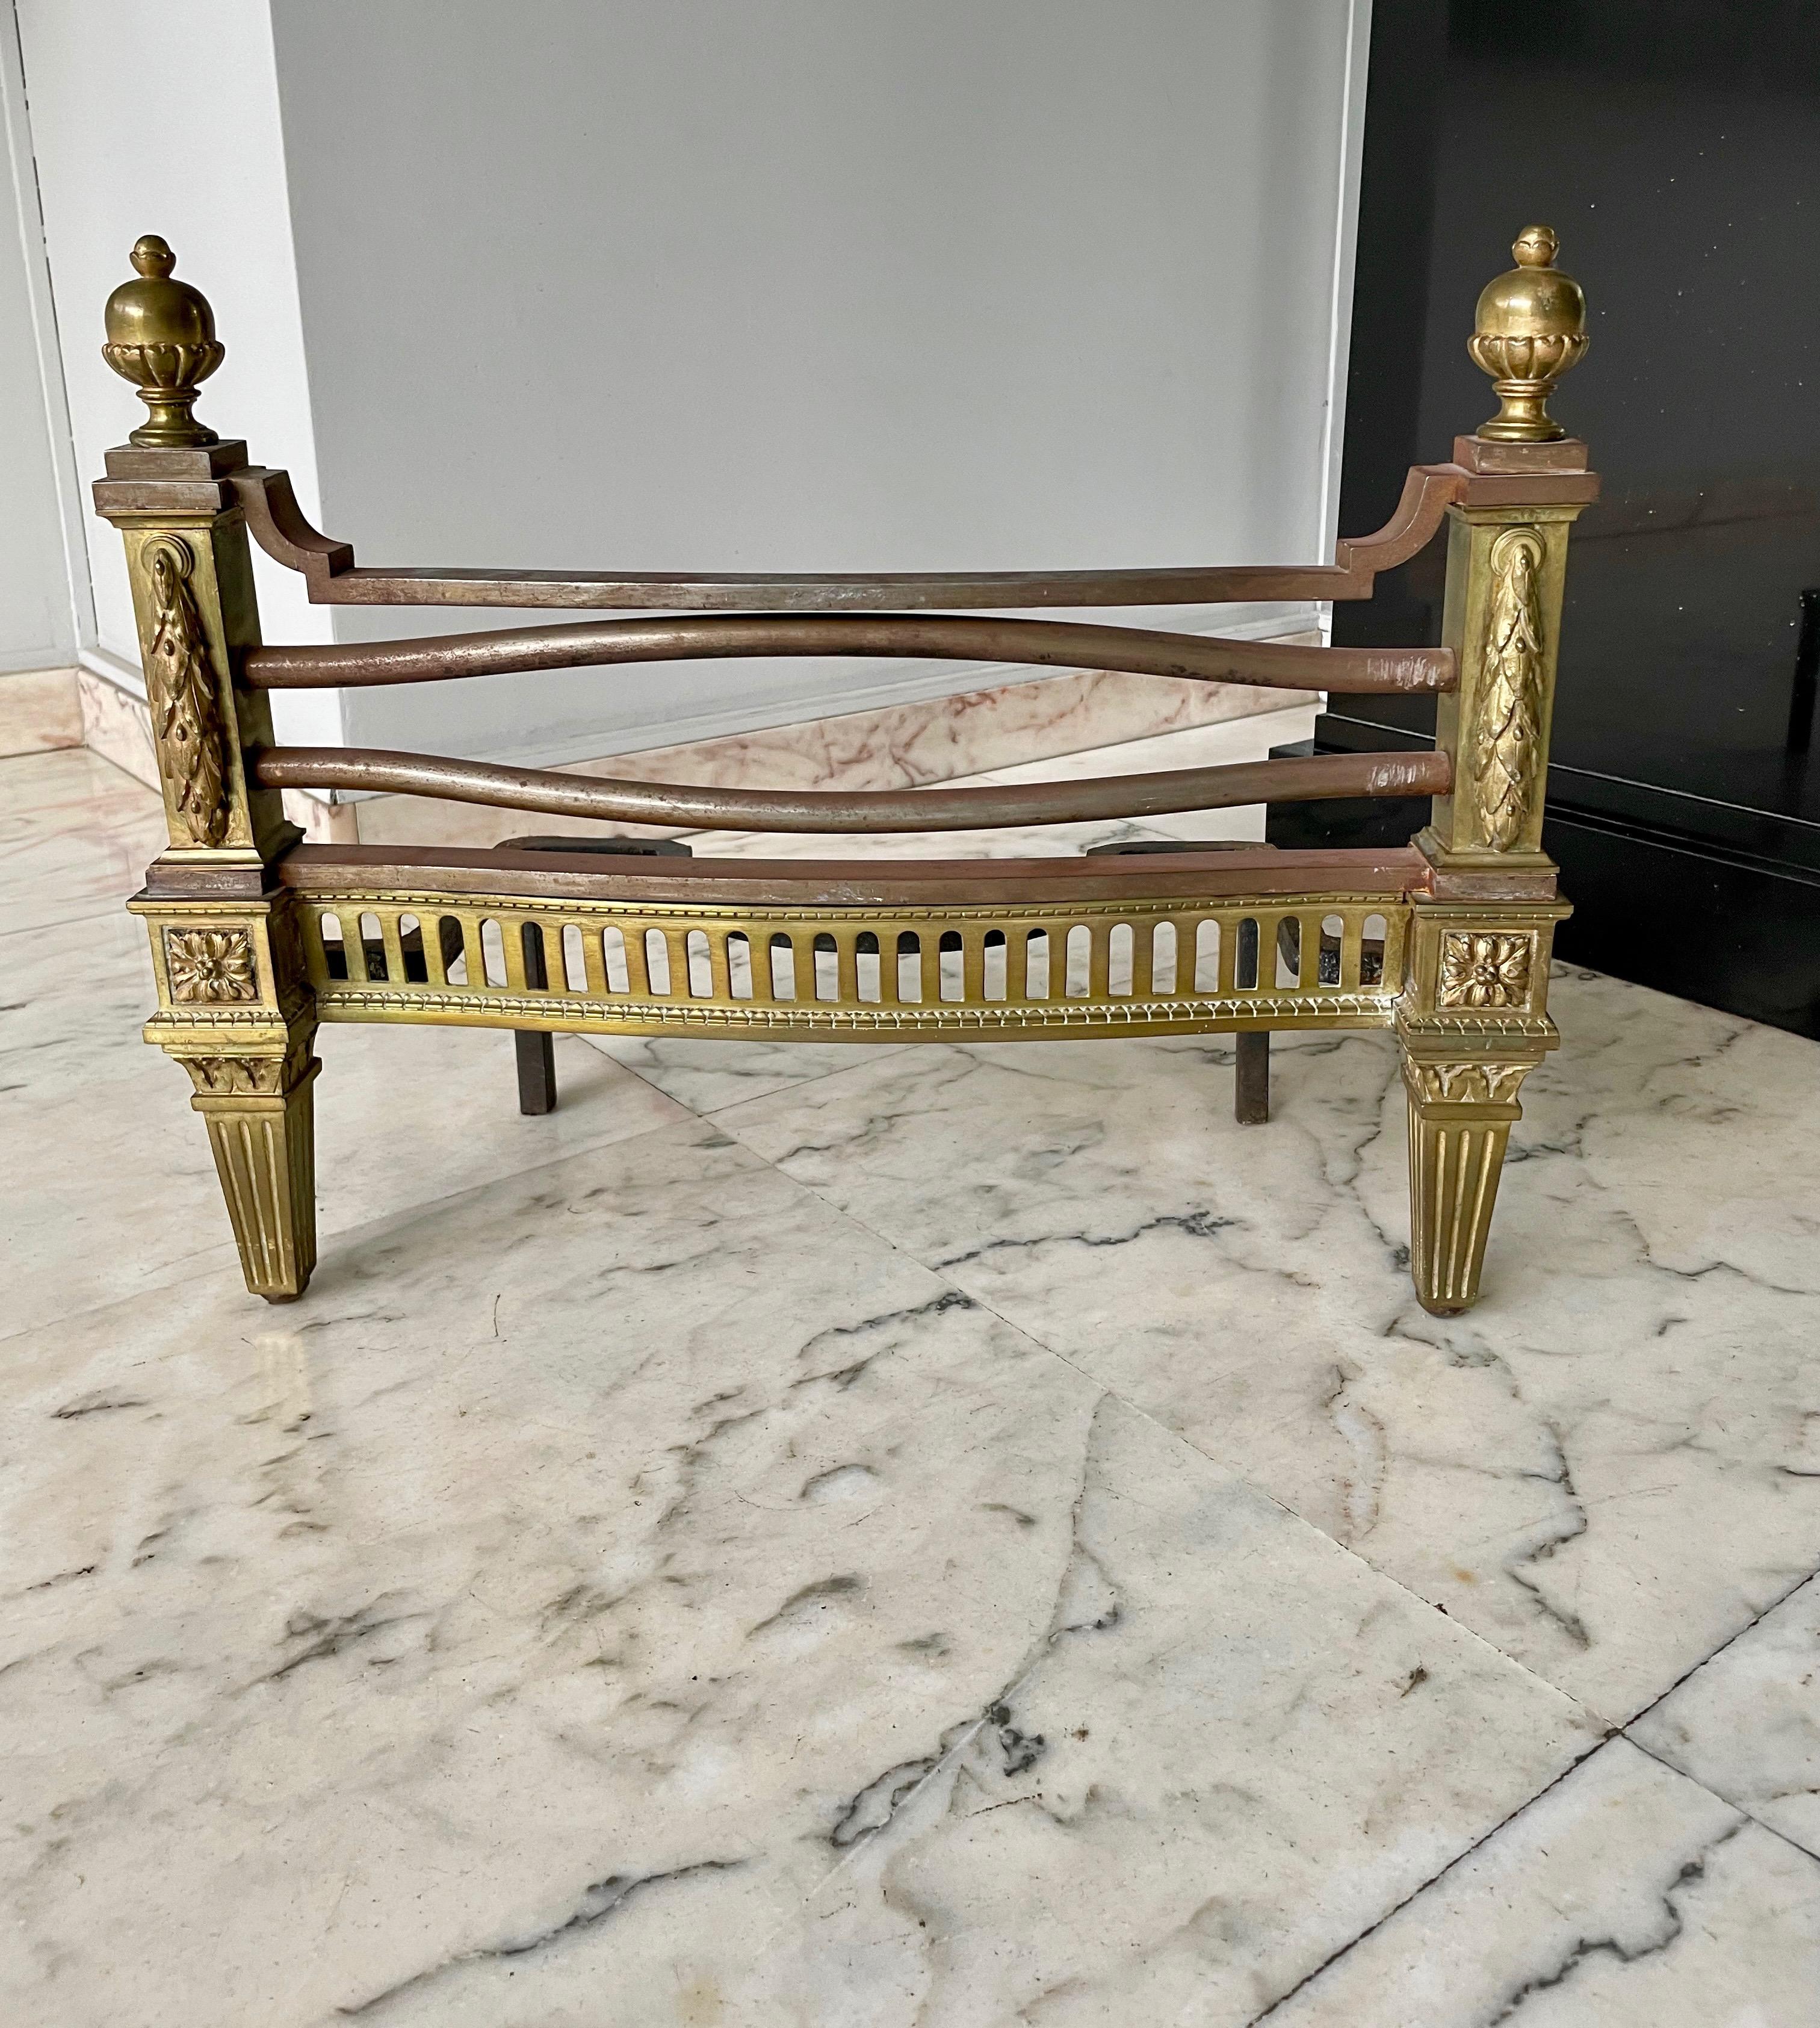 Elegant Mid-19th Century Stamped Gilt Bronze Andirons, France, Around 1850 For Sale 5